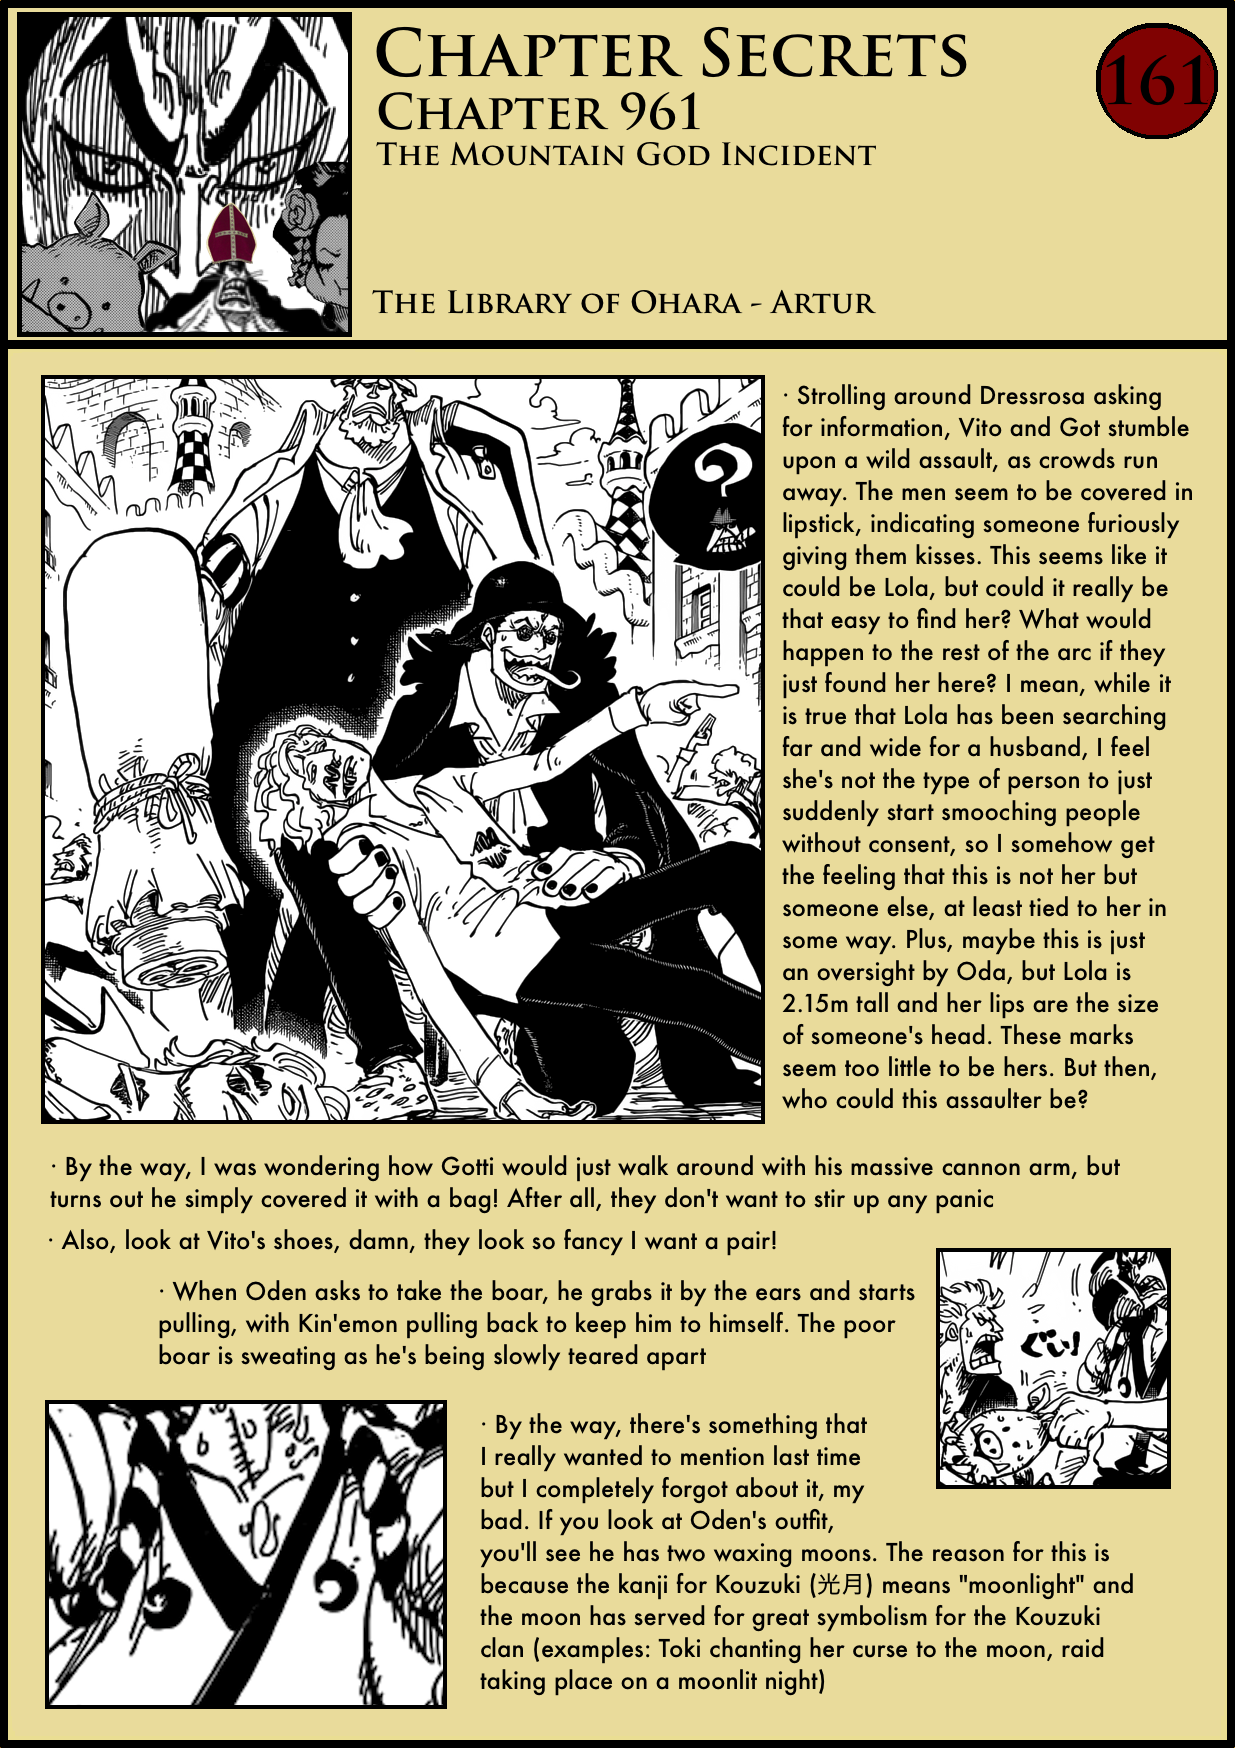 Chapter Secrets Chapter 961 In Depth Analysis The Library Of Ohara